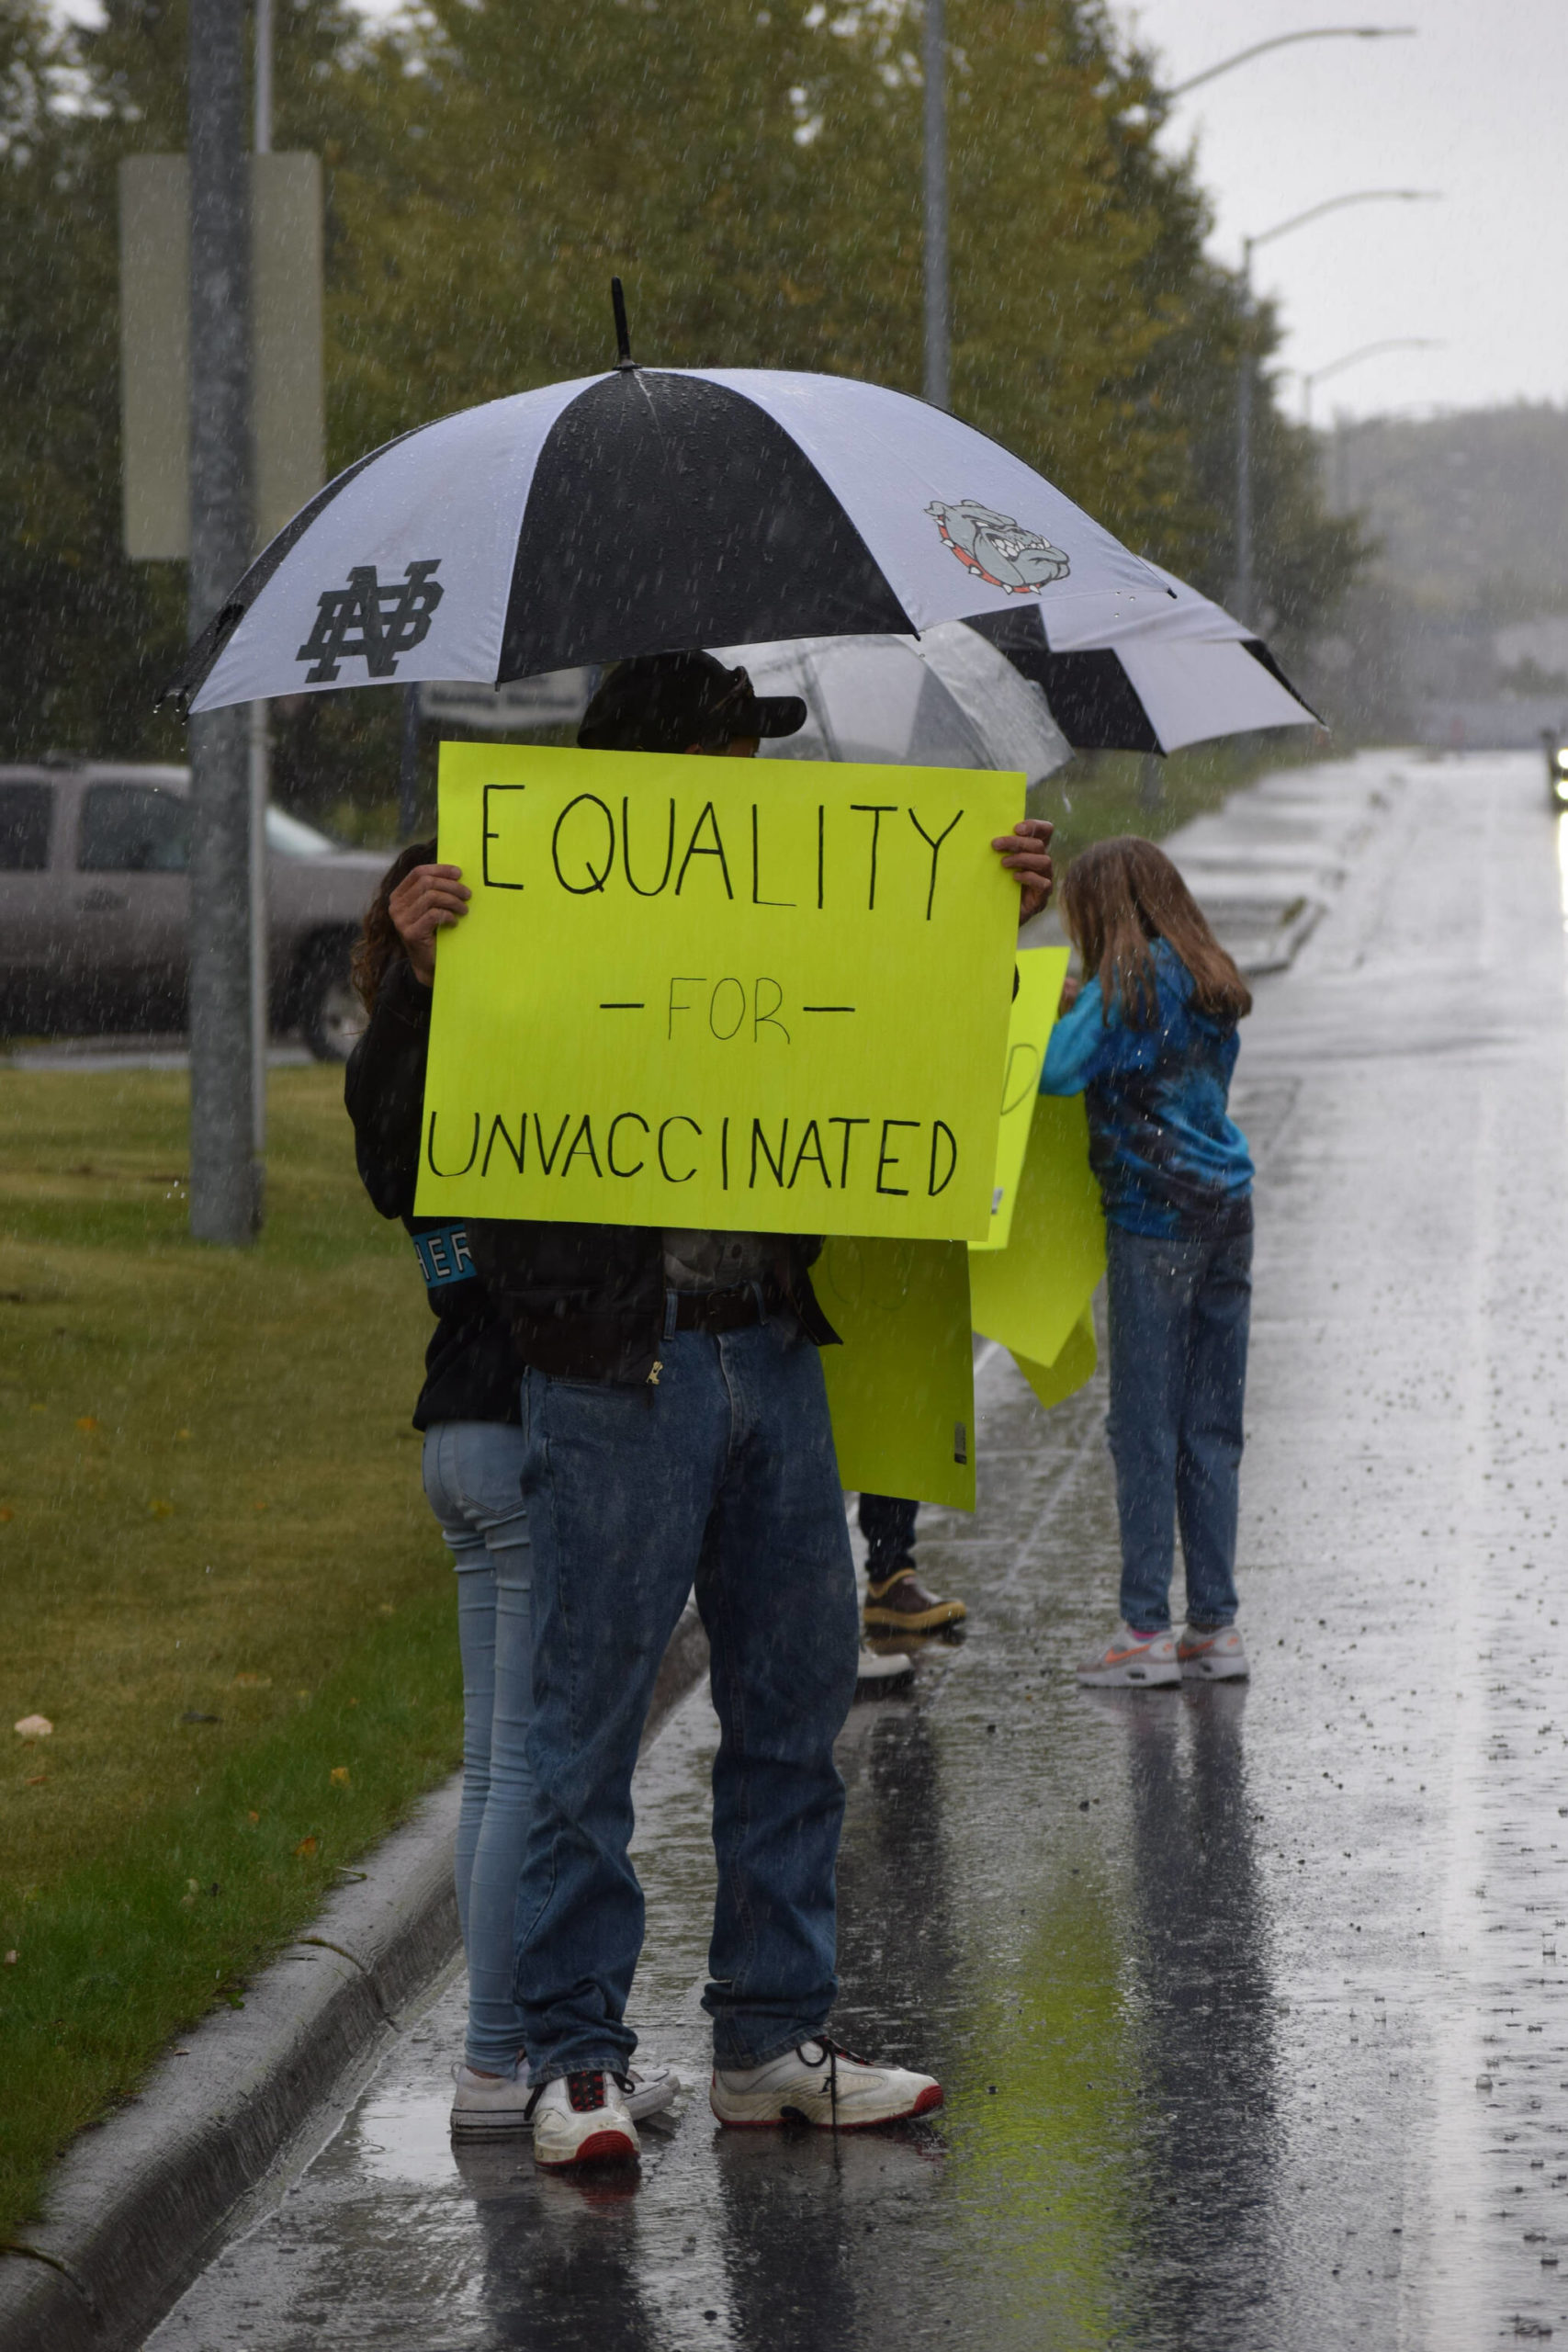 Protesters stands outside the George A. Navarre Borough Admin building in Soldotna on Tuesday, Sept. 14, 2021. (Camille Botello/Peninsula Clarion)